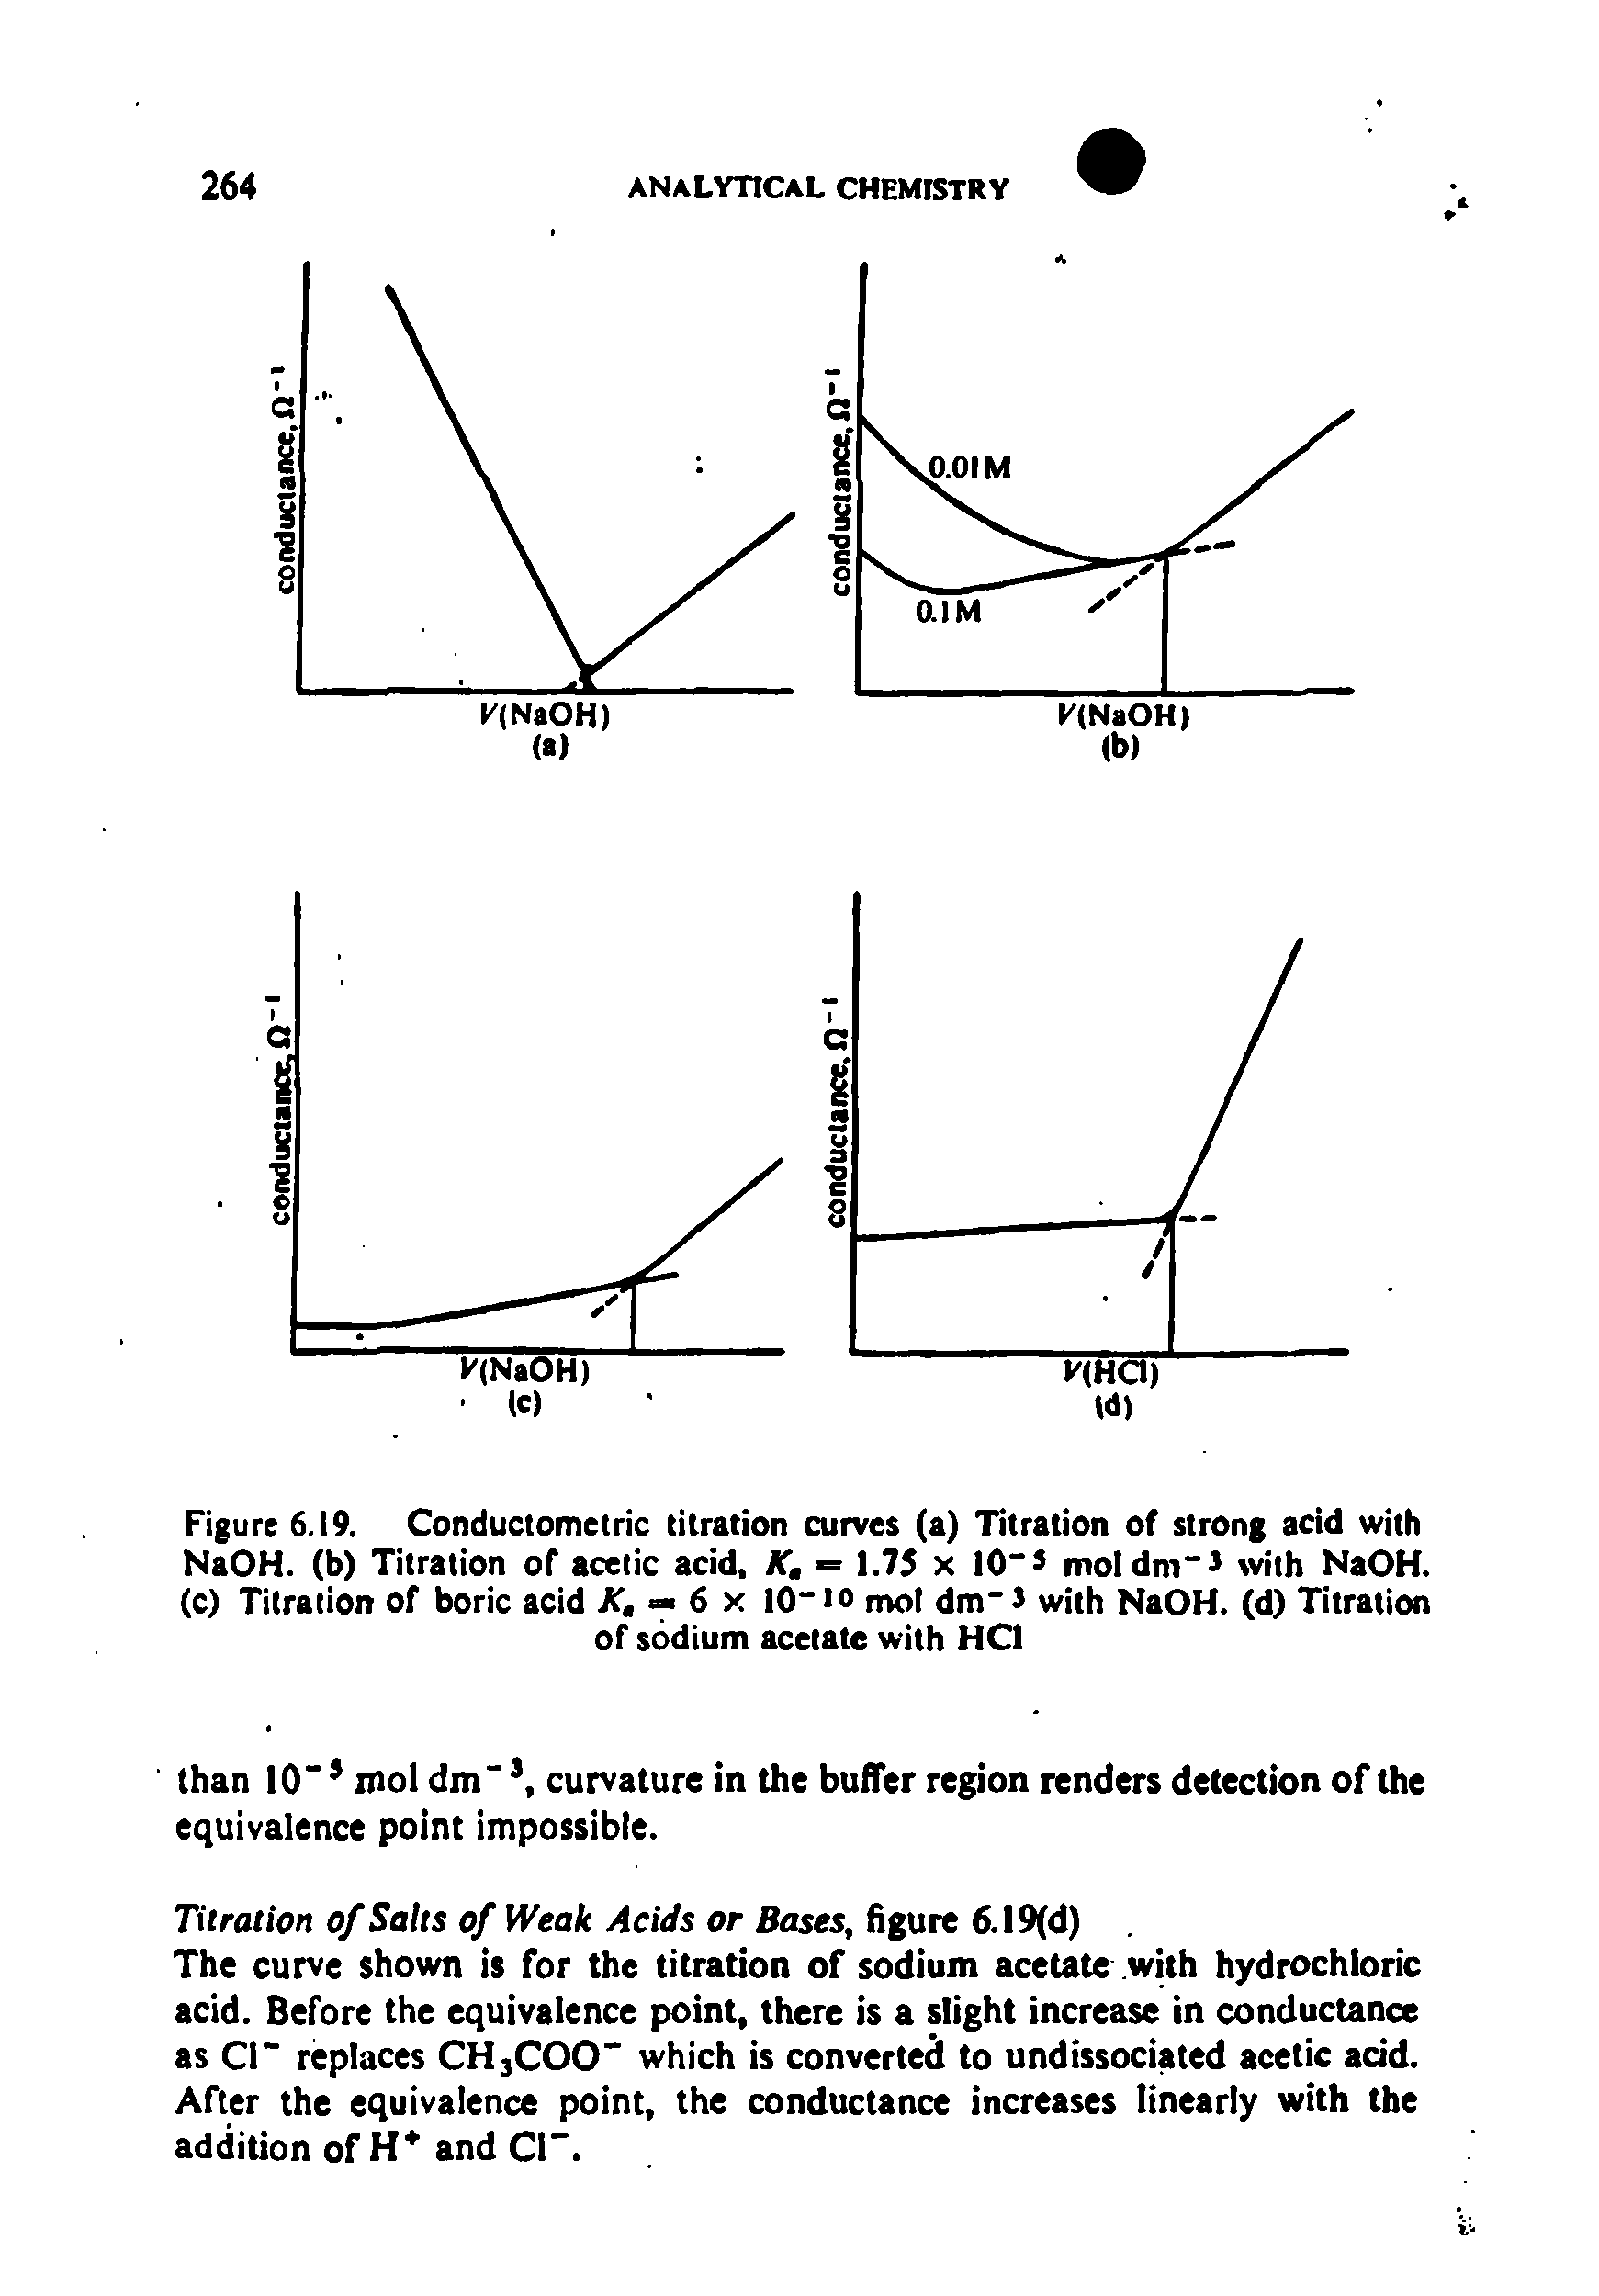 Figure 6.19. Conductometric titration curves (a) Titration of strong acid with NaOH. (b) Titration of acetic acid, K, = 1.75 x 10 3 mol dm" with NaOH. (c) Titration of boric acid Jf,= 6x 10" io mol dm" J with NaOH. (d) Titration...